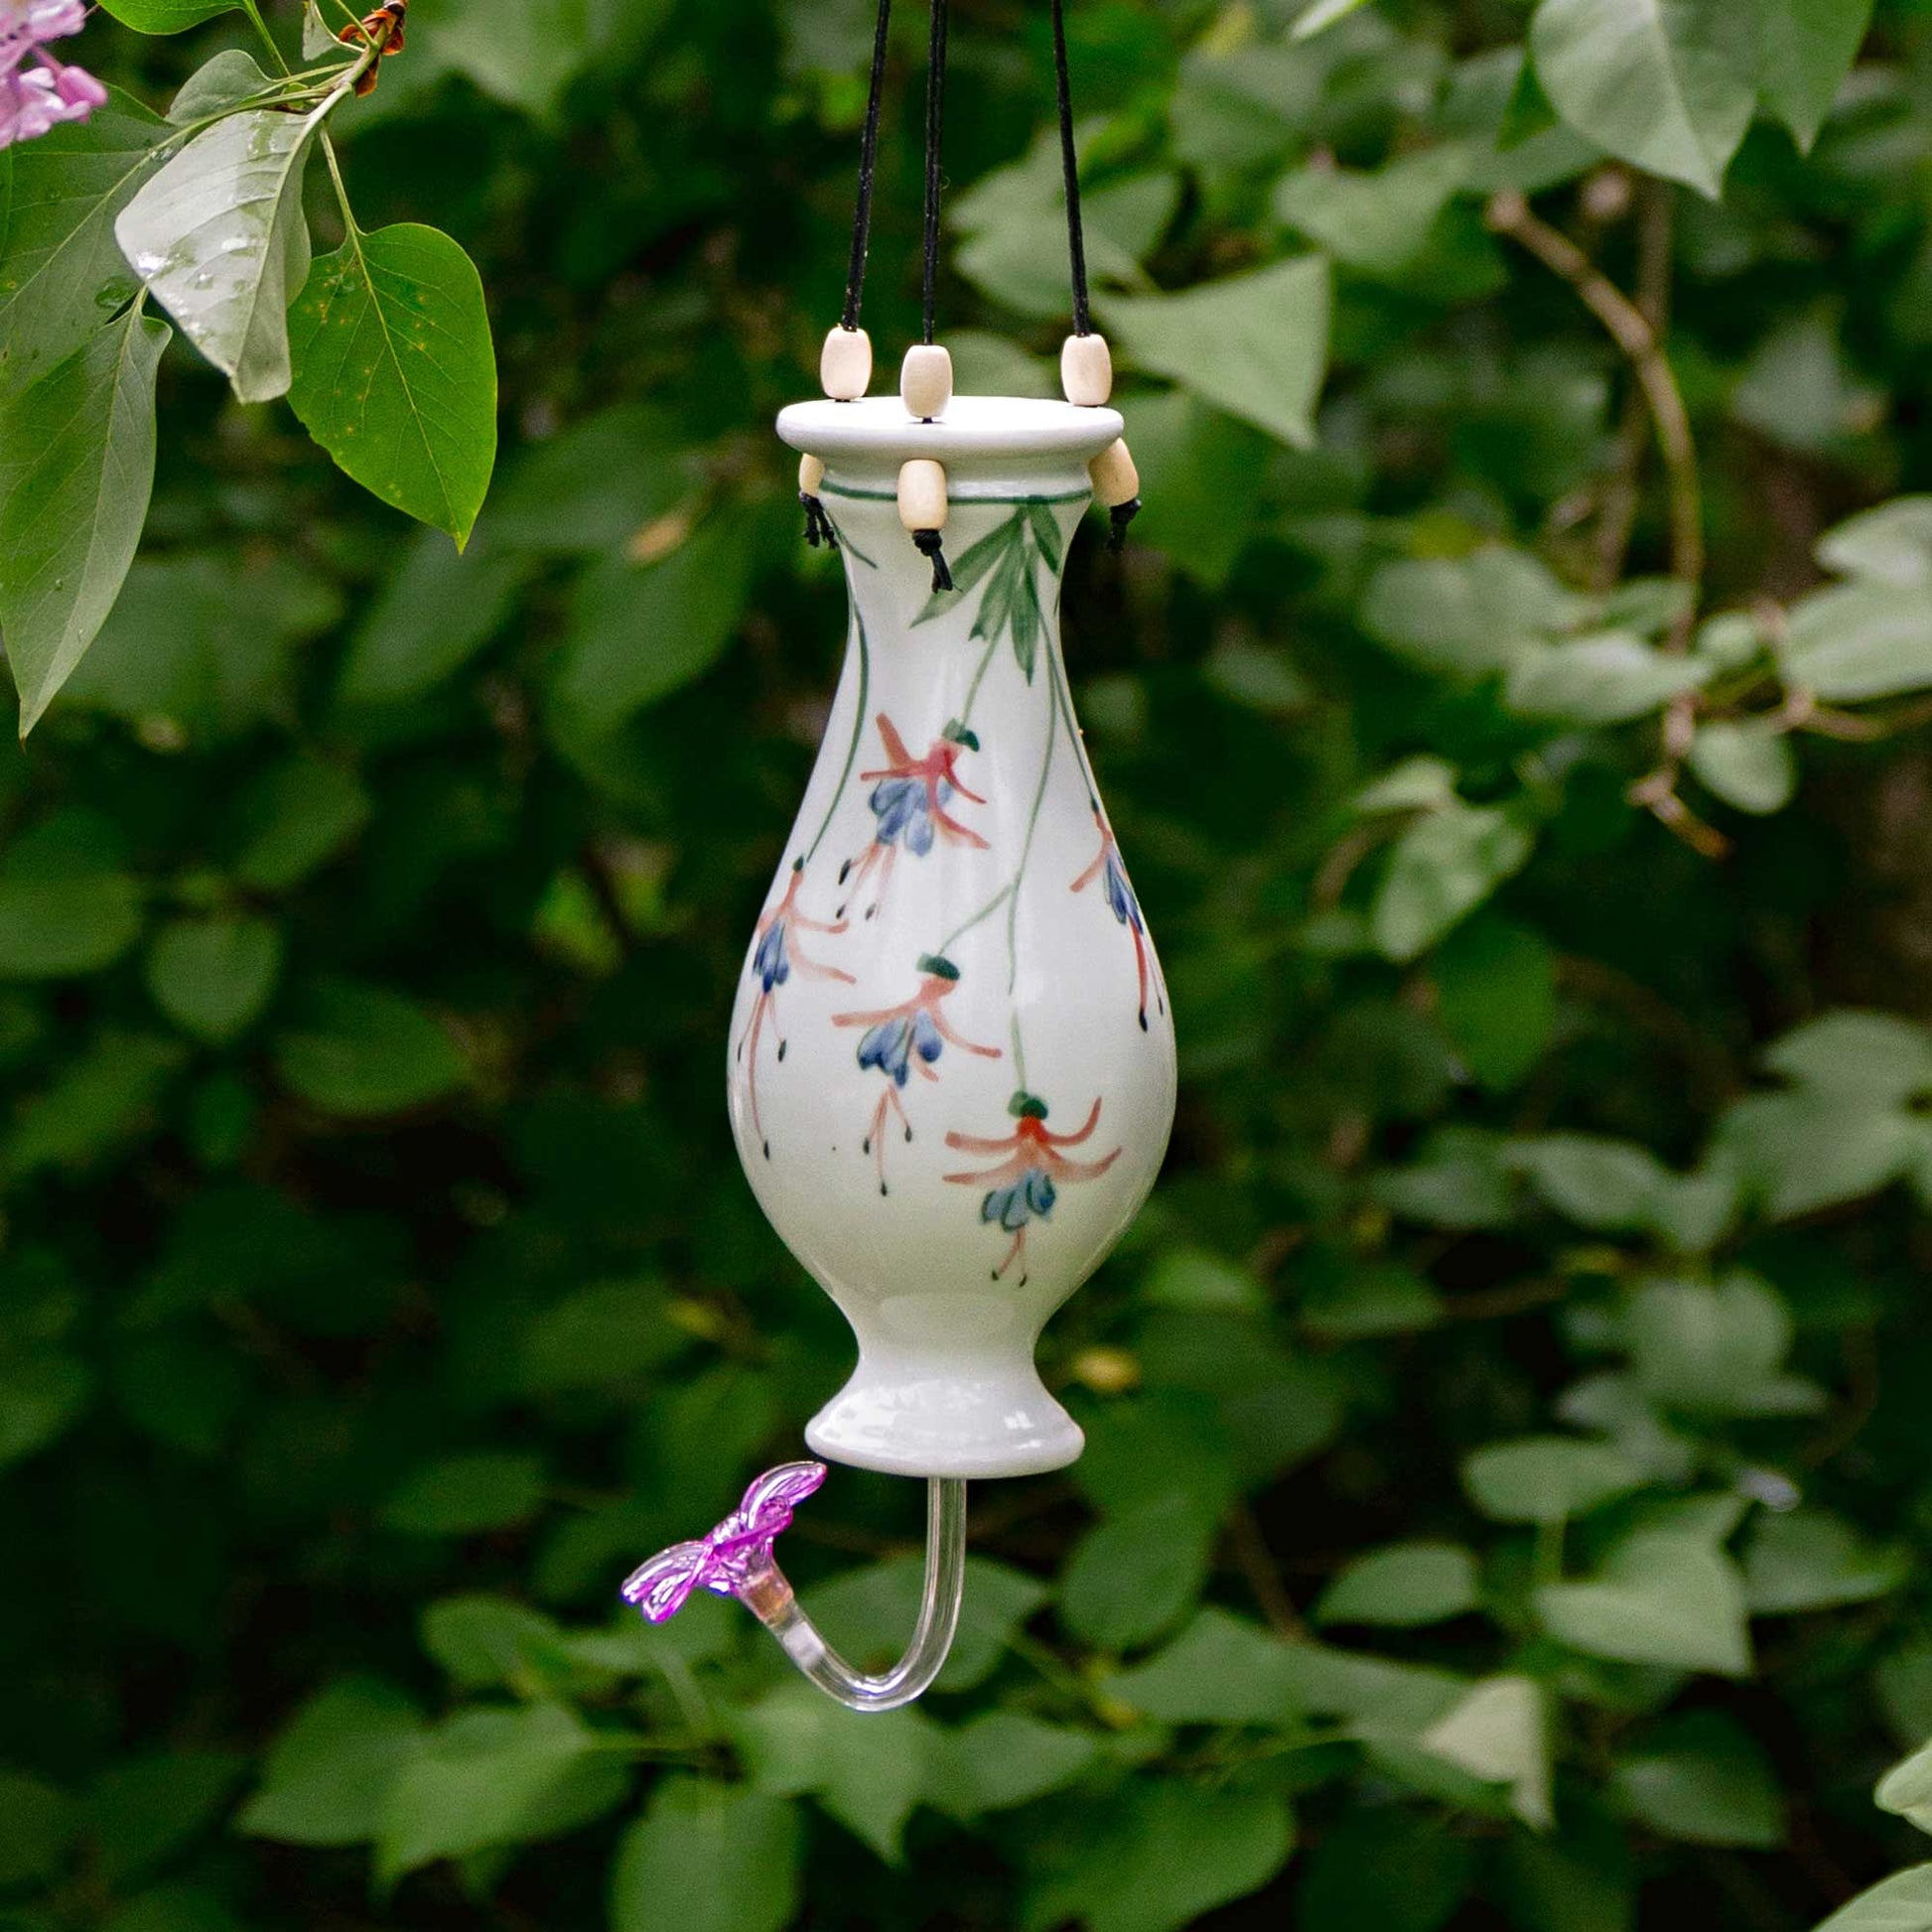 Handmade Pottery Bottle Hummingbird Feeder in Fuschia pattern made by Georgetown Pottery in Maine